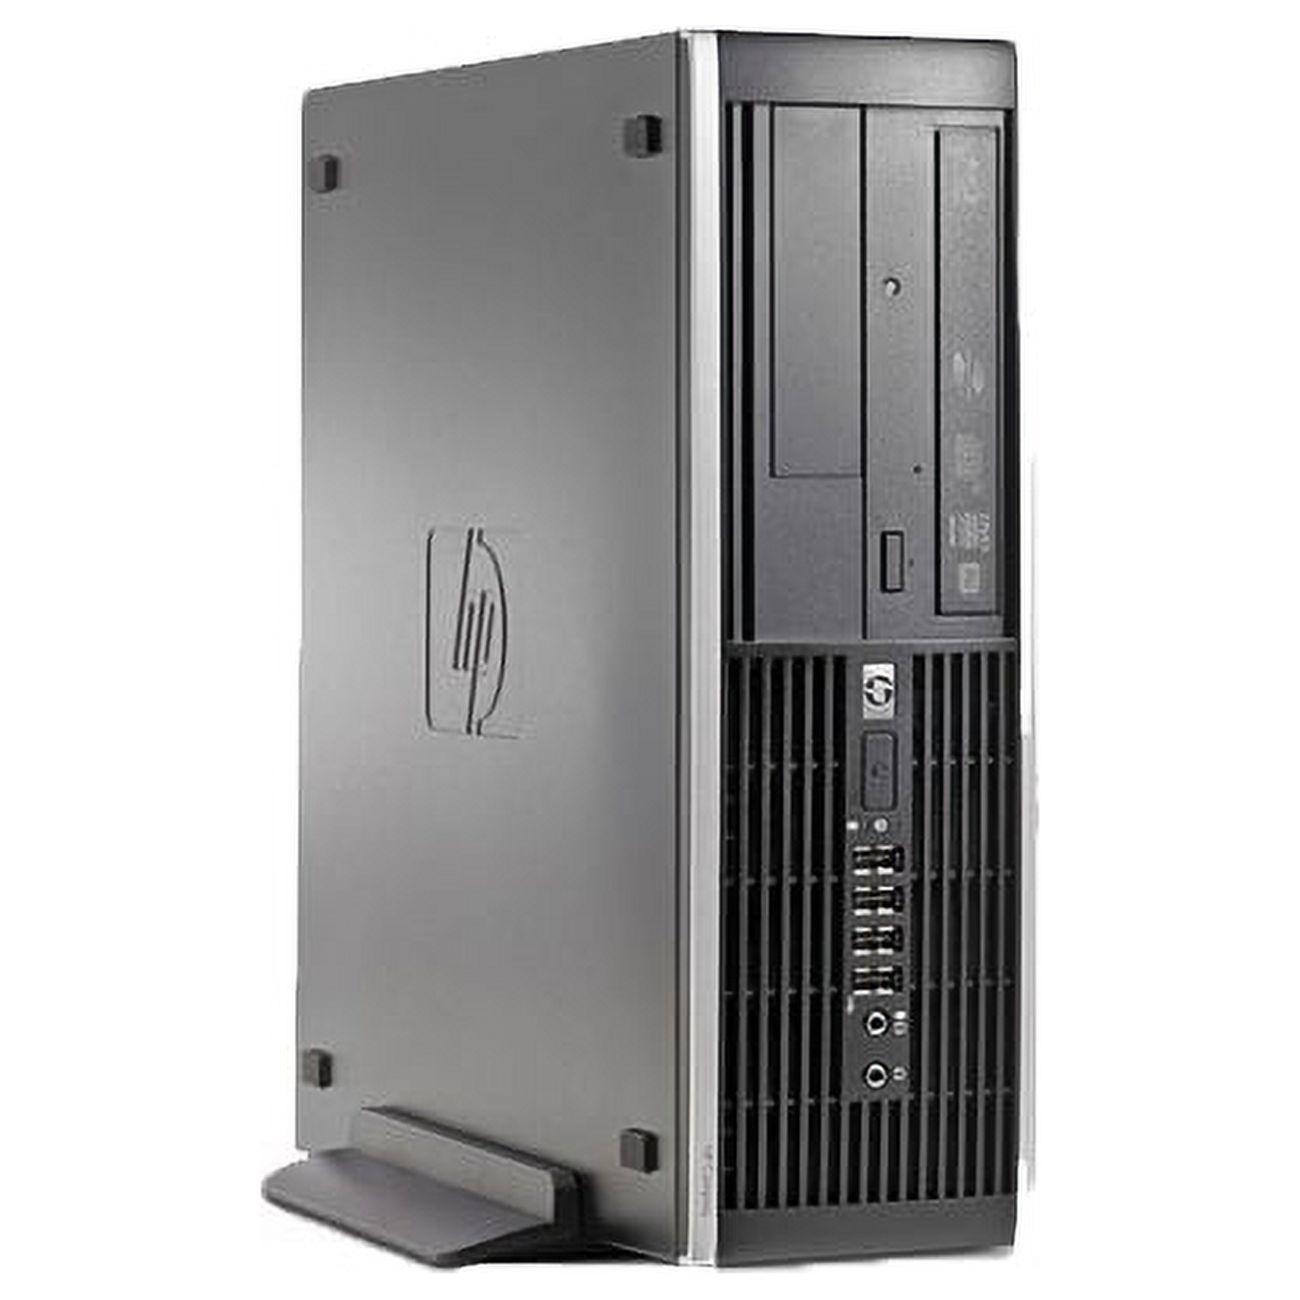 Restored HP DC Desktop Computer 3.3 GHz Core i3 Tower PC, 8GB, 160GB HDD, Windows 10 Home x64, Office 365 Essentials, 19" Monitor , USB Mouse & Keyboard (Refurbished) - image 2 of 4